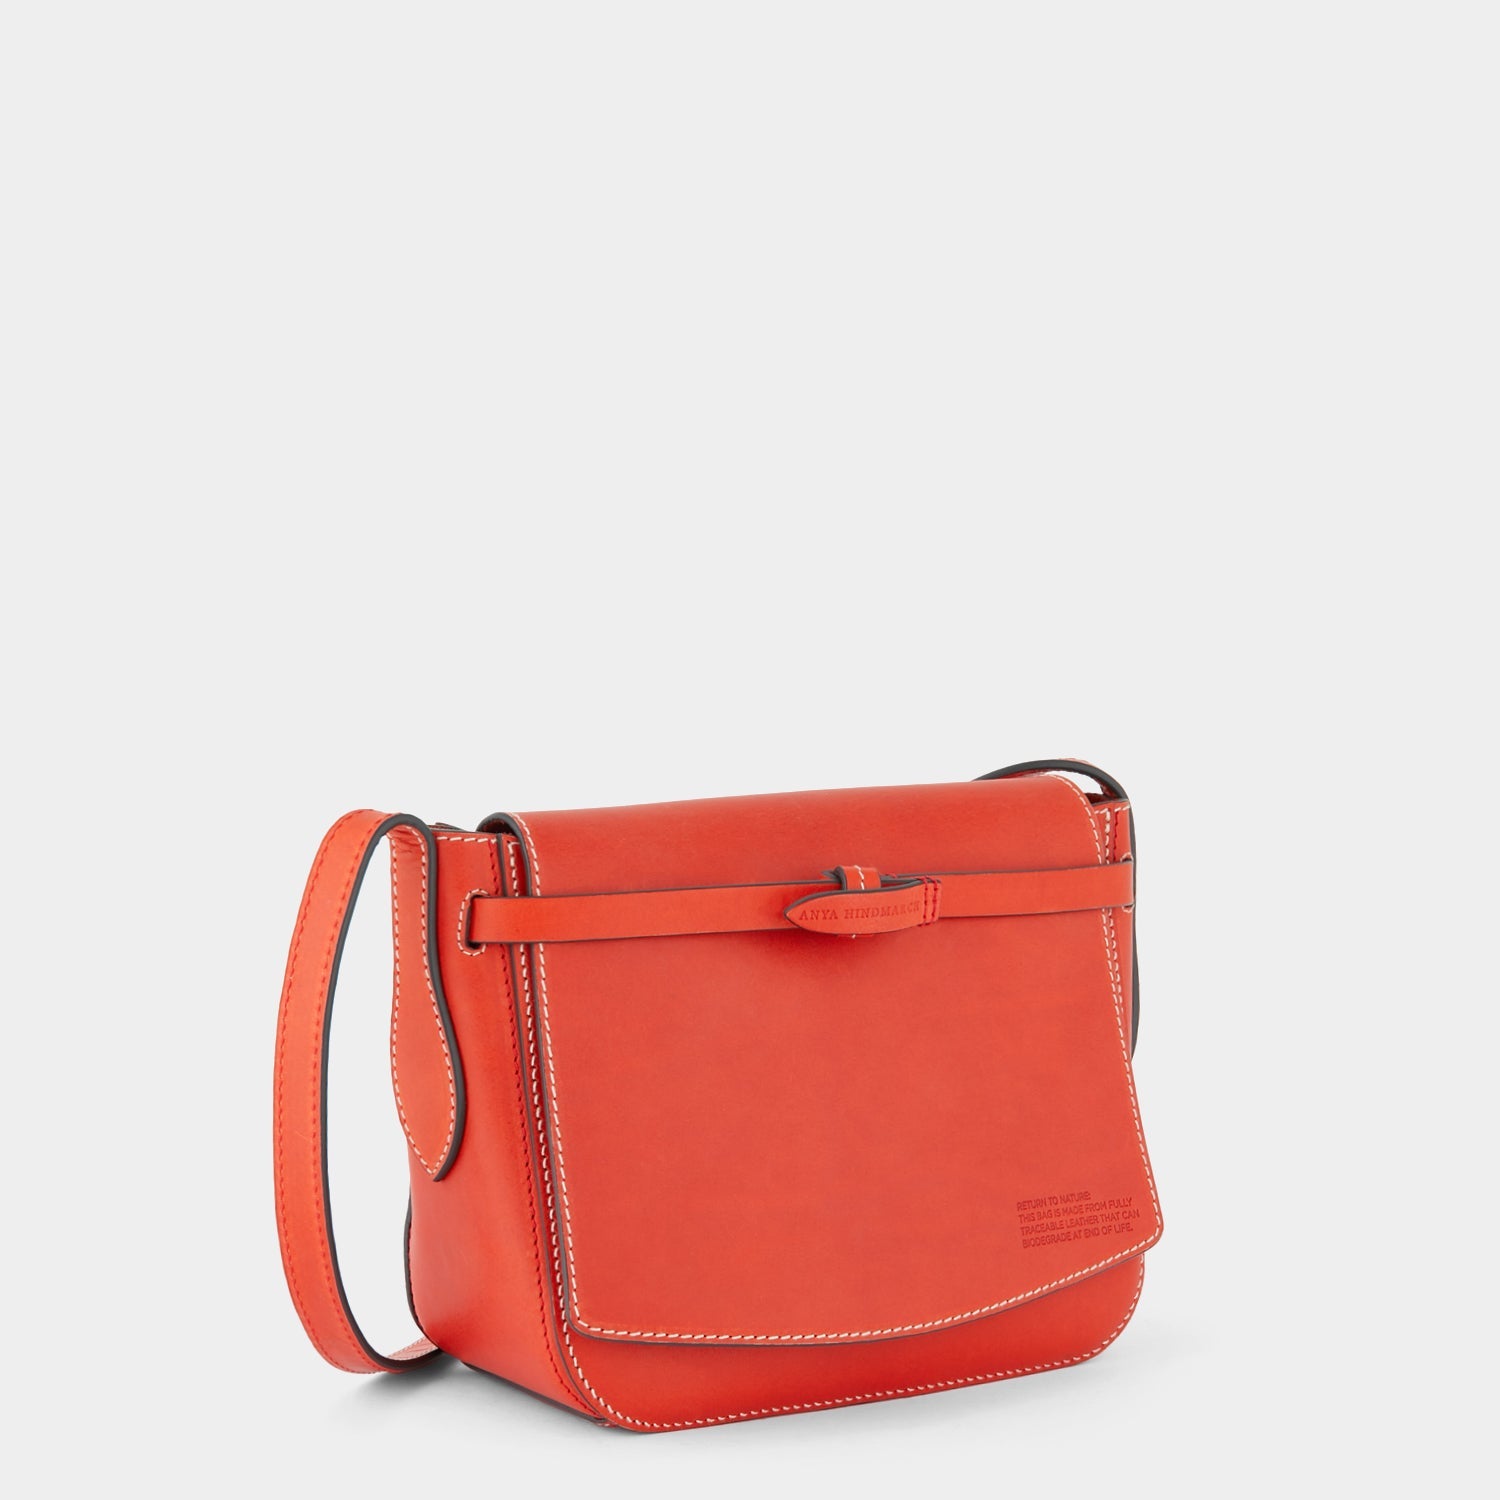 Return to Nature Cross-body -

                  
                    Compostable Leather in Flame Red -
                  

                  Anya Hindmarch EU
